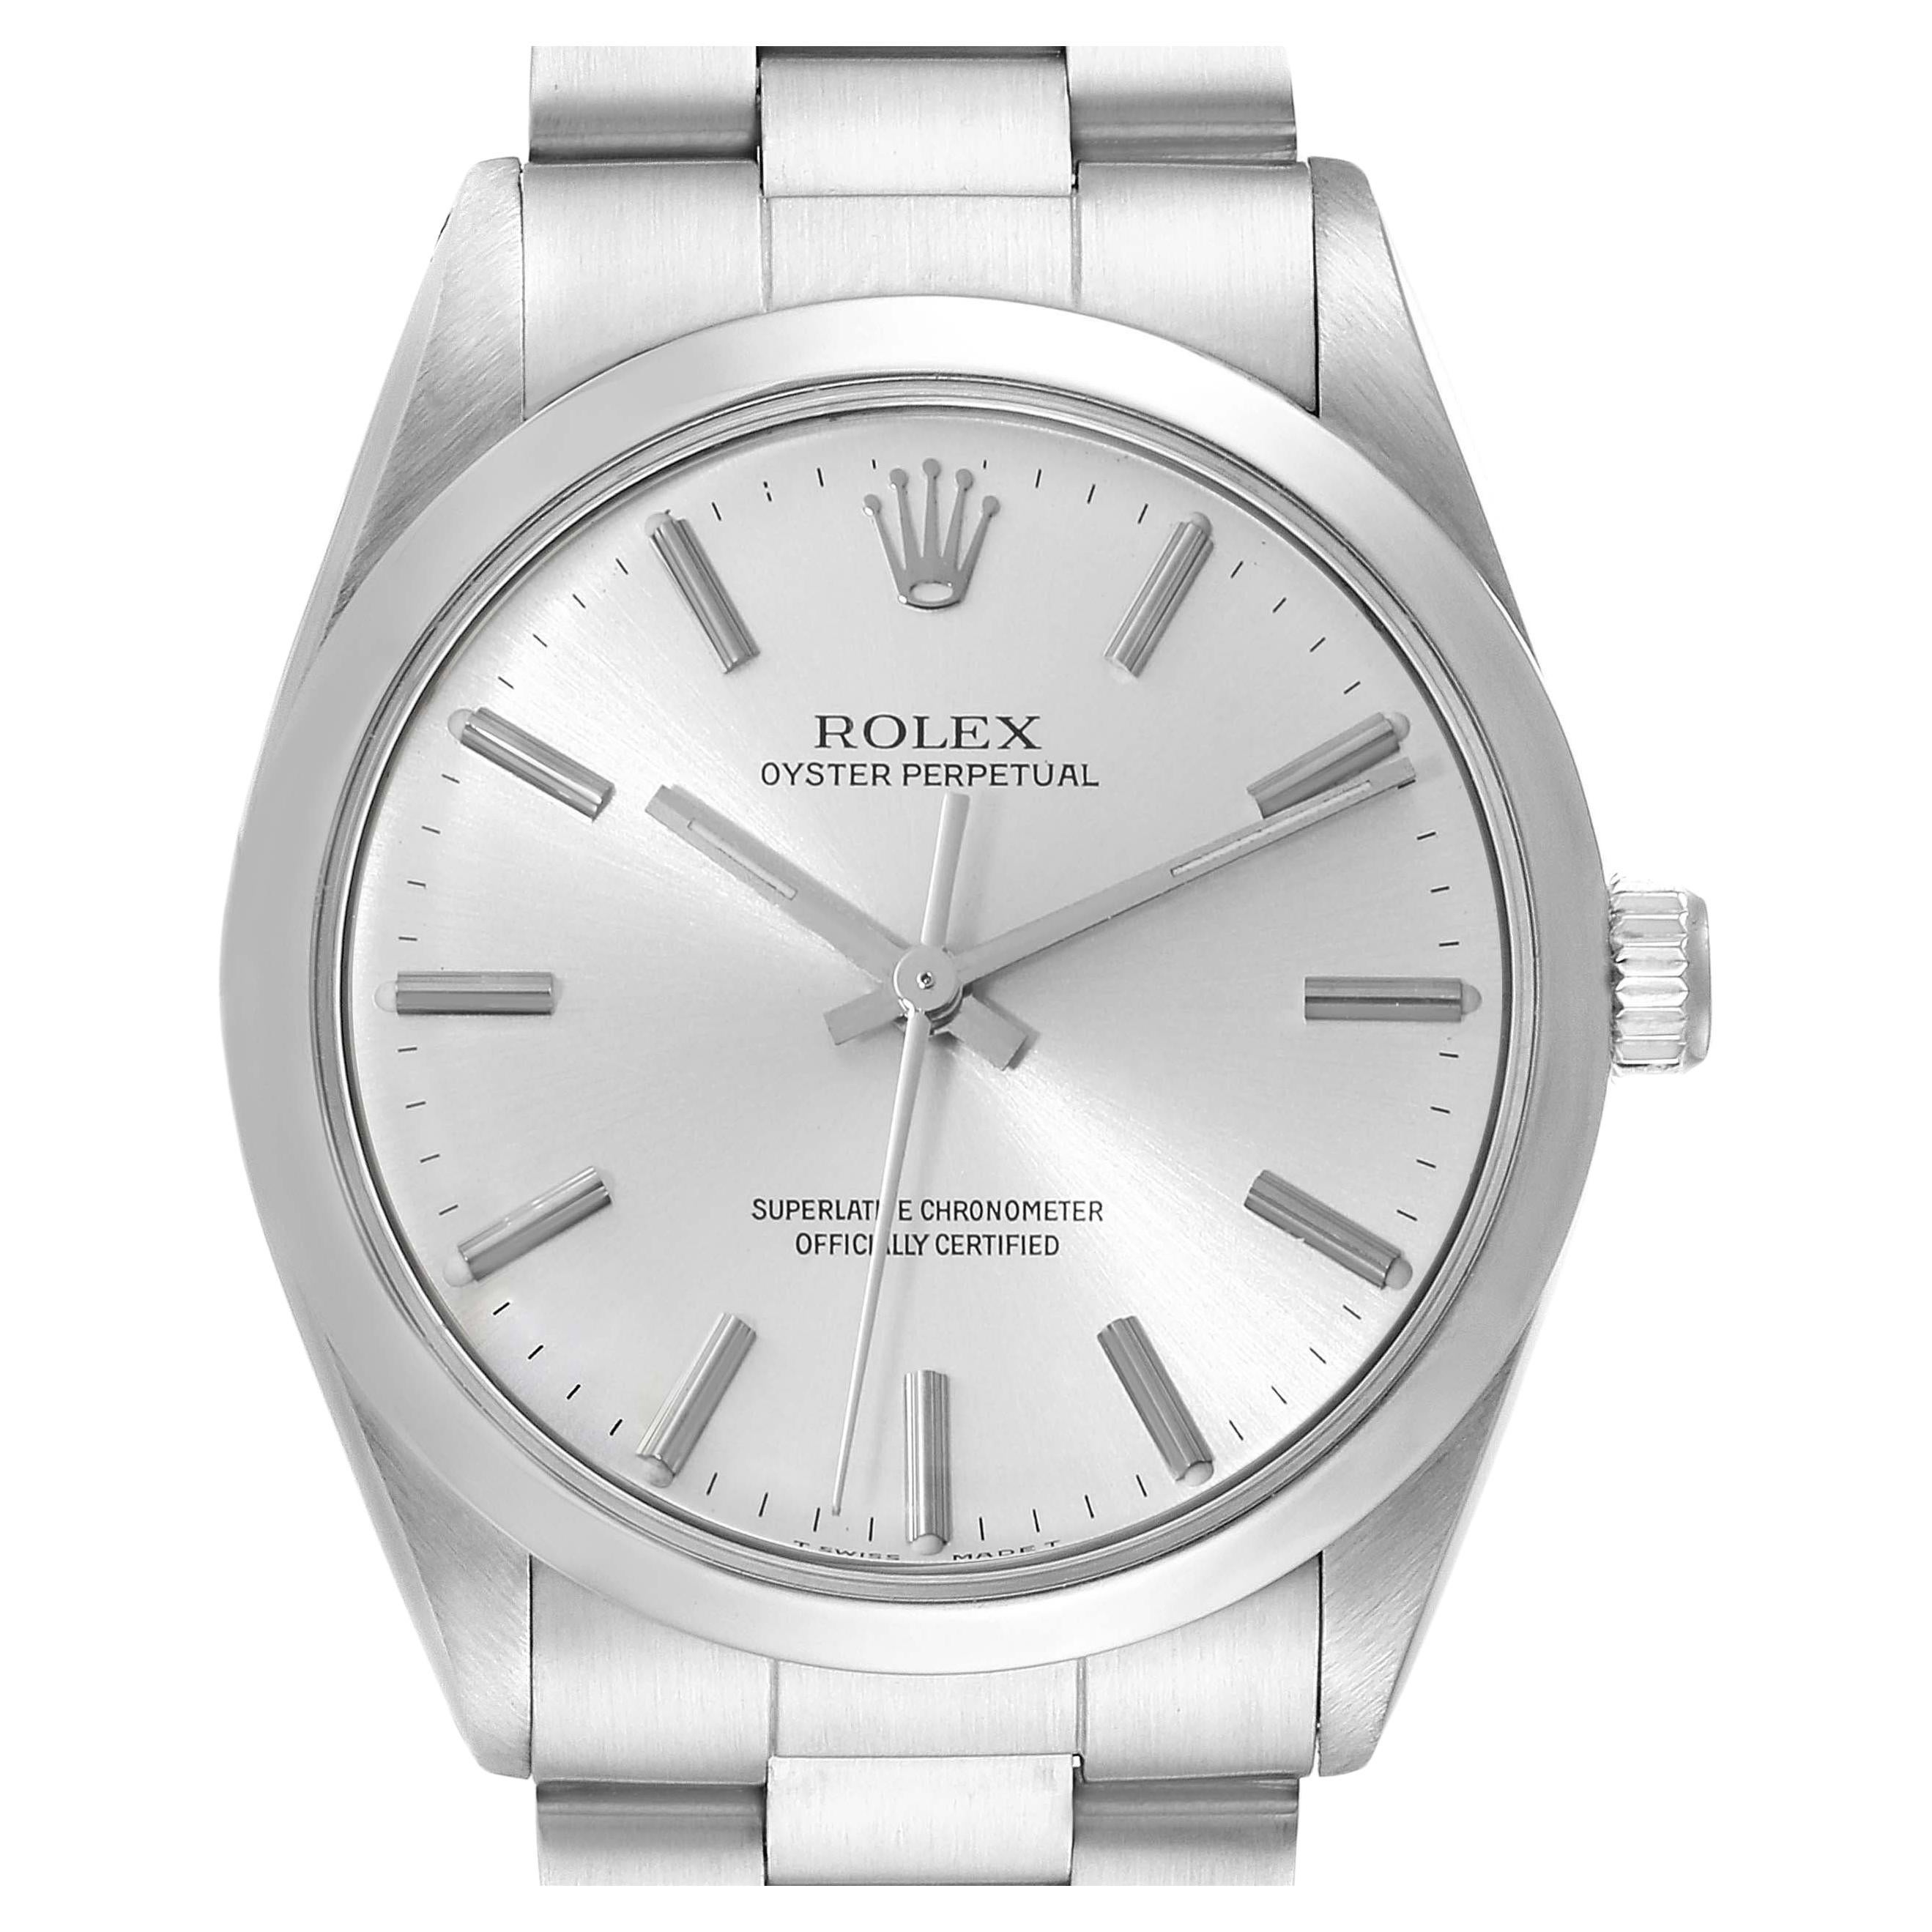 Rolex Oyster Perpetual Silver Dial Vintage Steel Mens Watch 1002